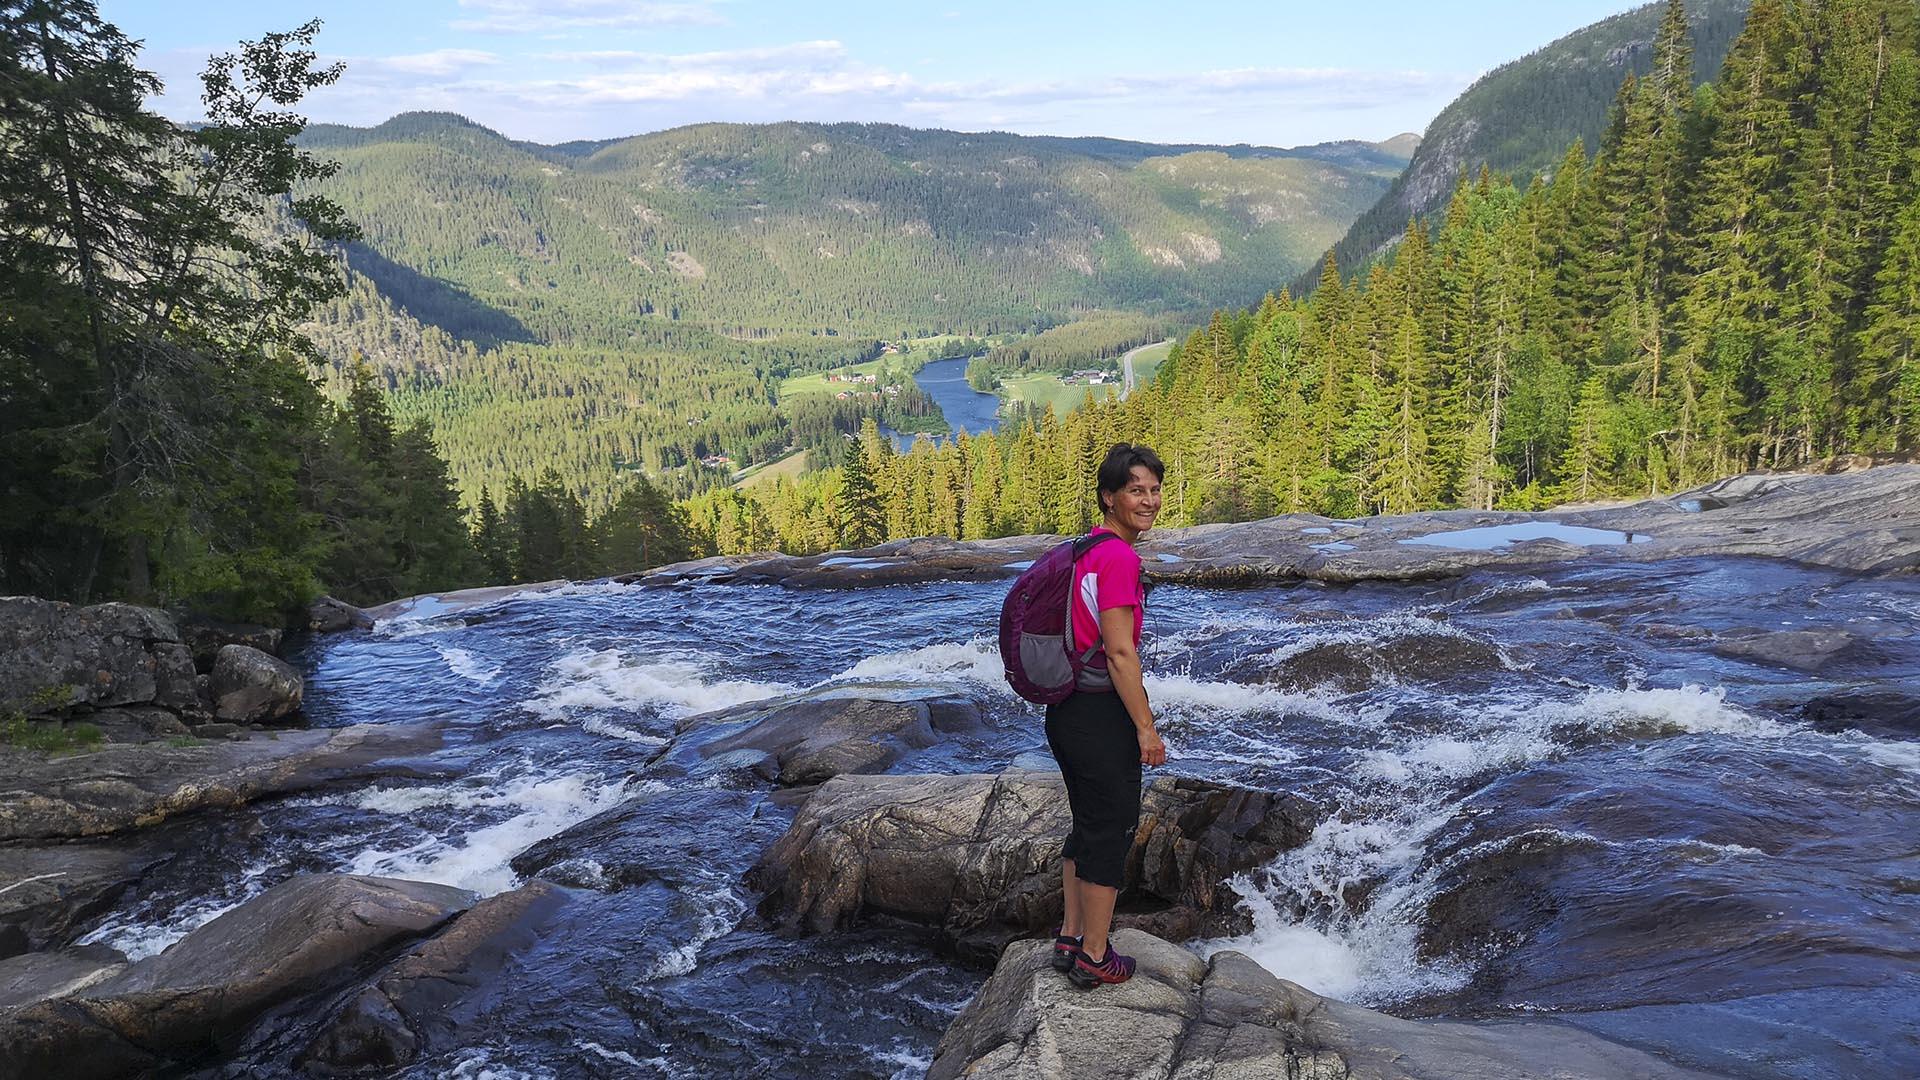 A woman with a day pack isn tanding on a rock in a river that drops and disapears into a waterfall behind her. In the background, far below, a view into the main valley with a large river and forests.